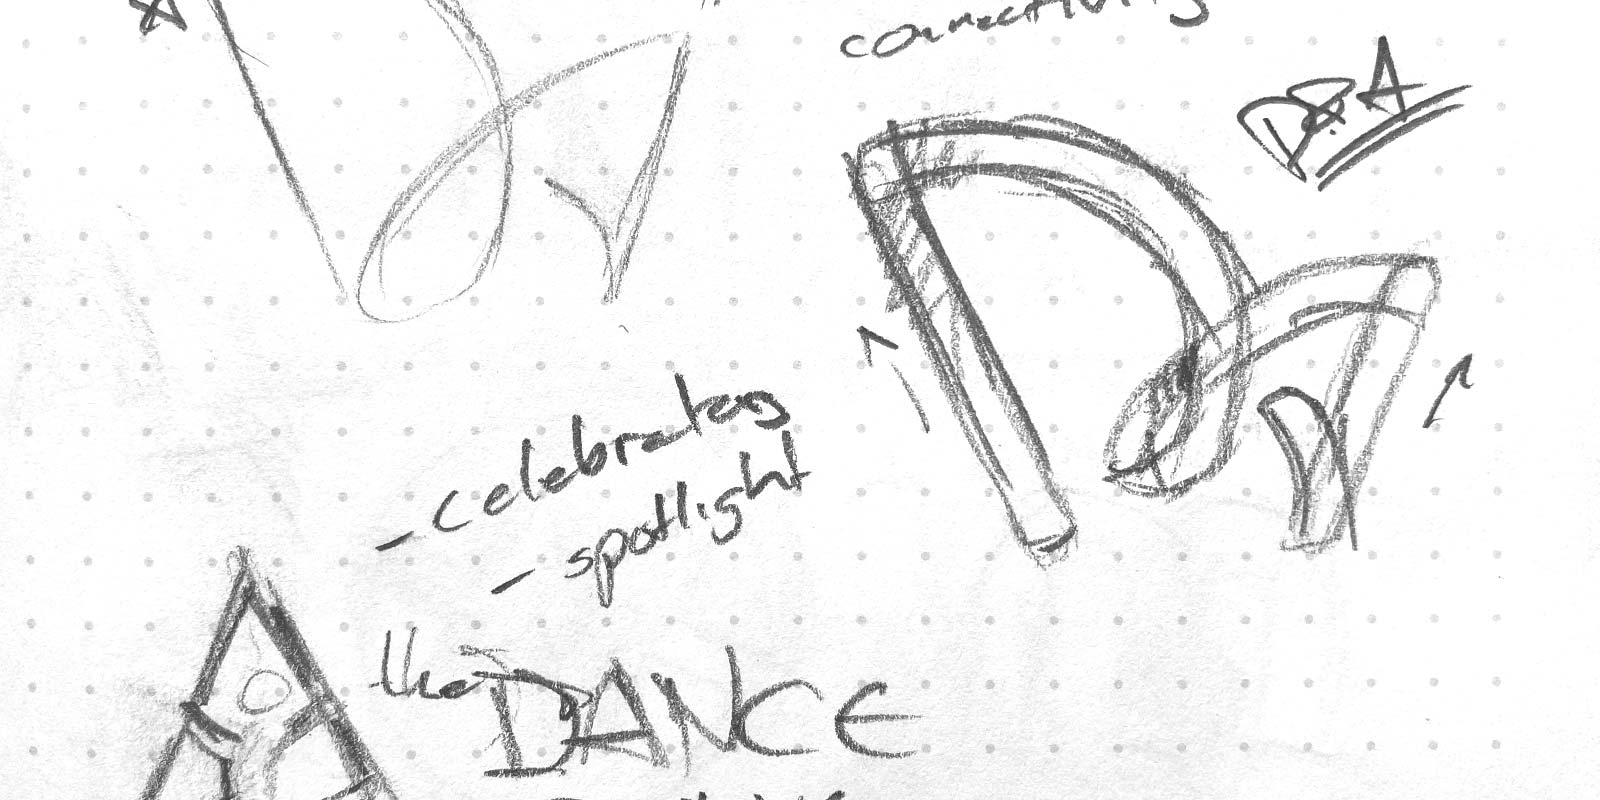 The Dance Archive logo sketch